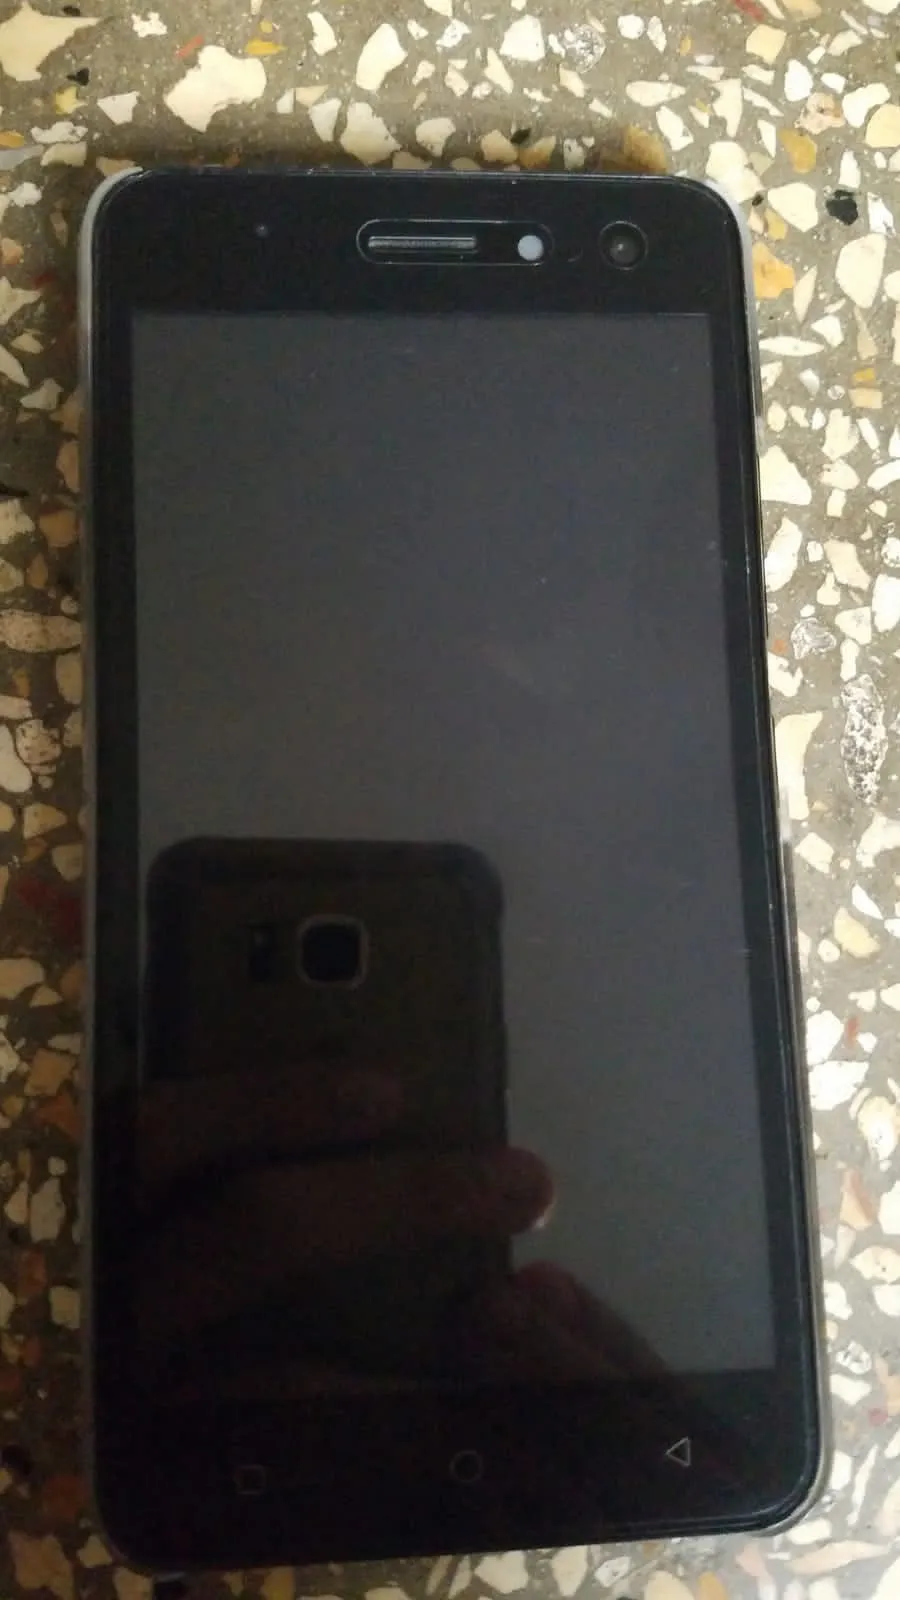 Itel a33 for sale in reasonable price also exchange possible - photo 1